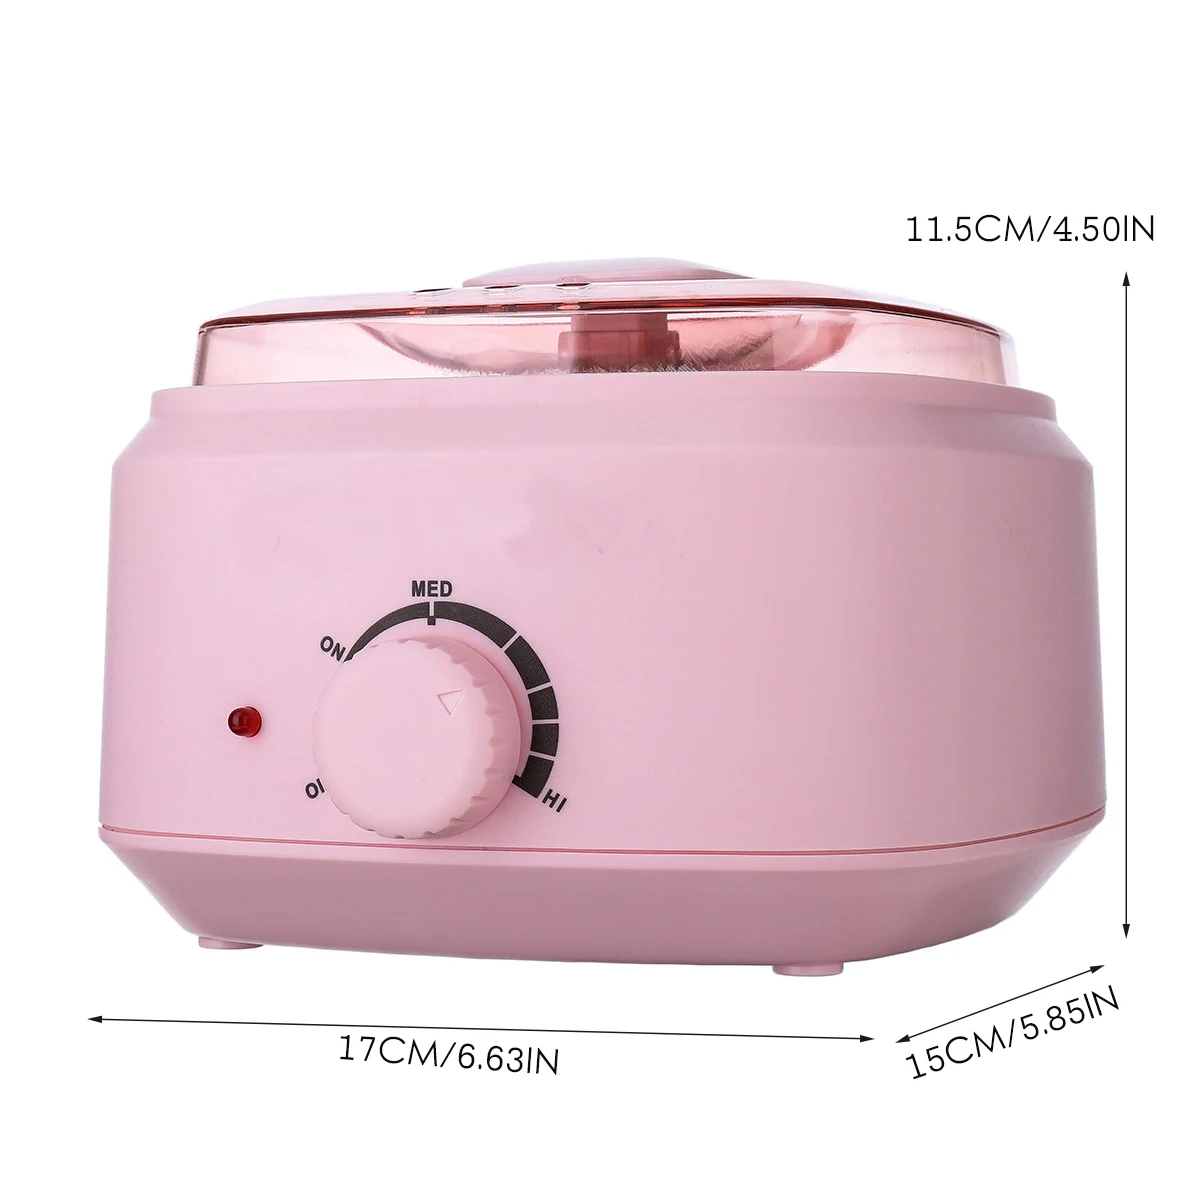 Heaters 500CC Wax Heater Depilation Dipping Pot Hair Removal Warmer Machine Waxing Kit Removing Unwanted Hairs In Legs Whole Body Parts